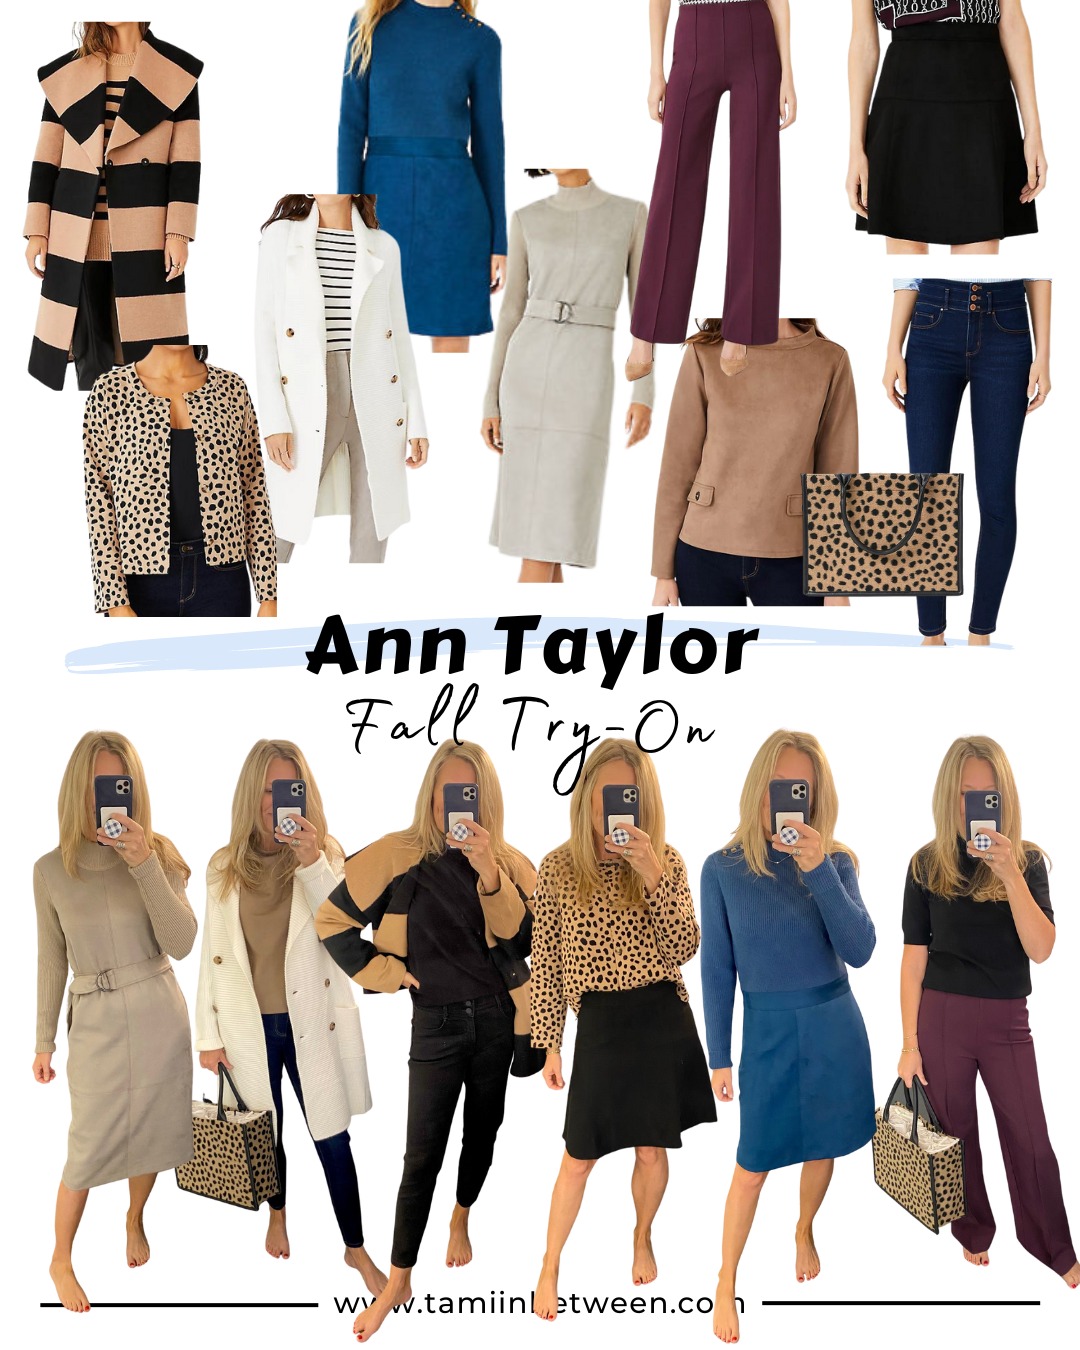 ANN TAYLOR FALL TRY ON - We Bought a Mountain!